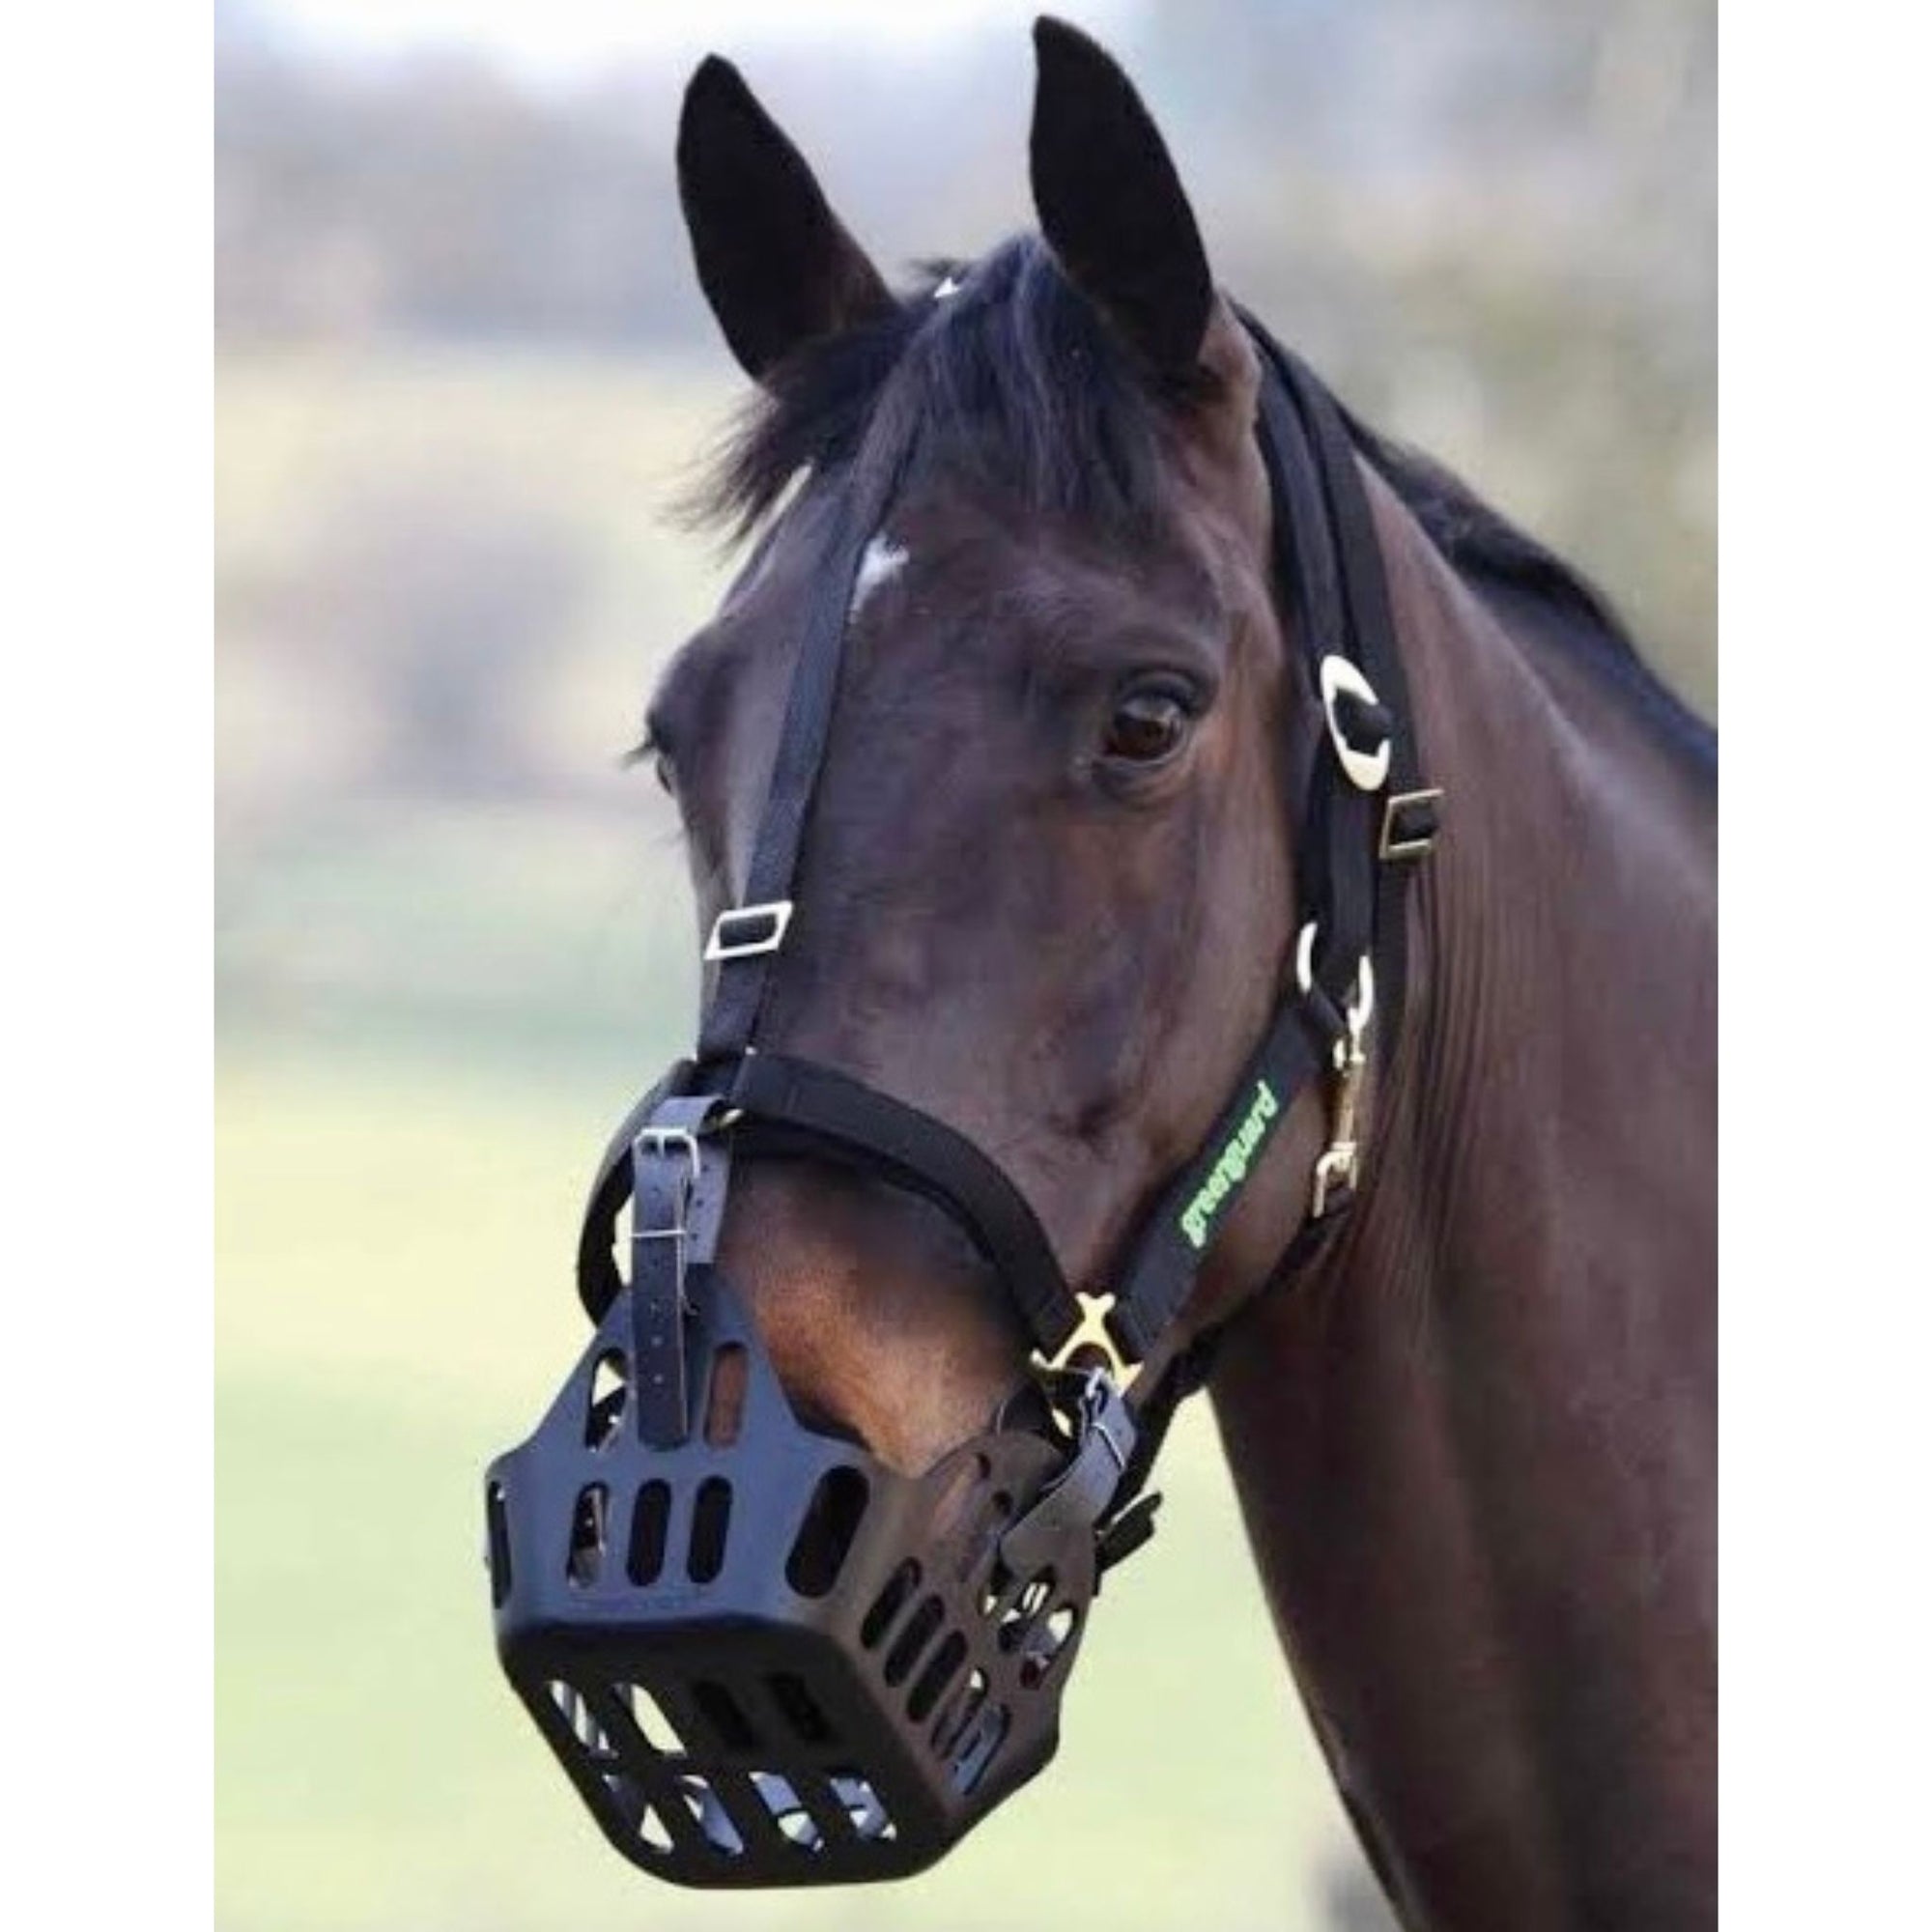 Horse wearing black halter with extra strap down front, and muzzle attached.